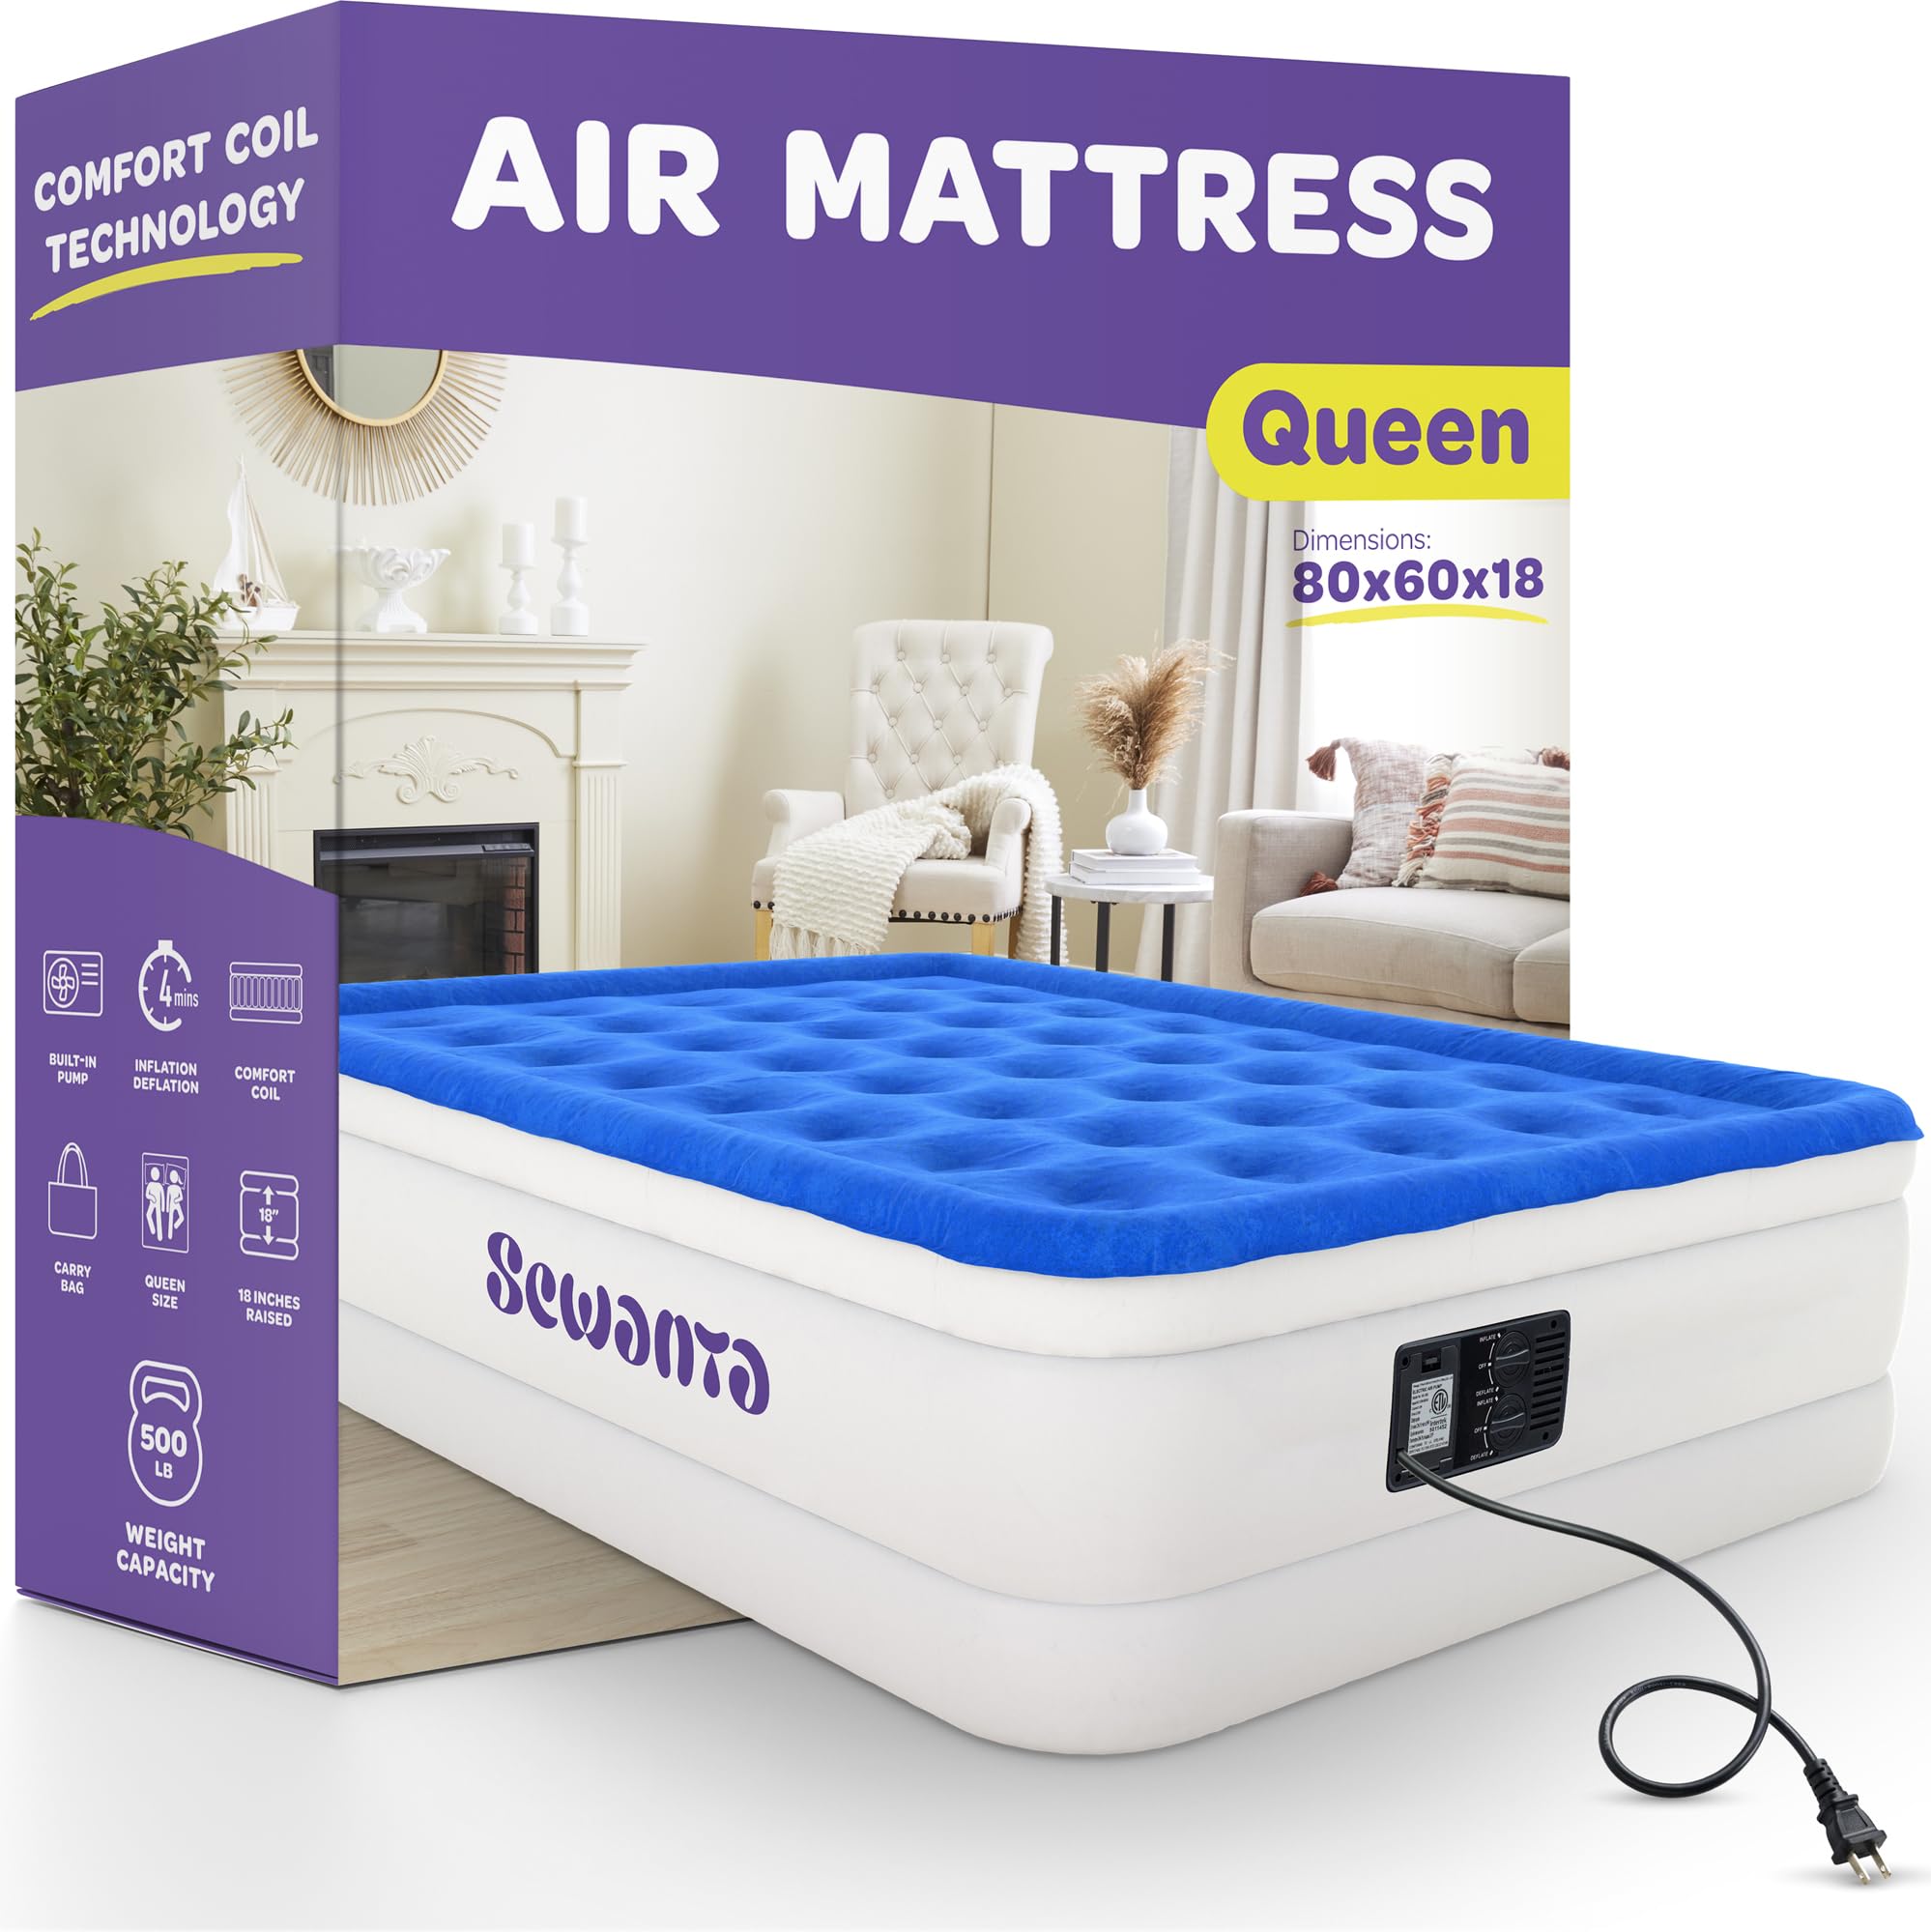 Air Mattress Queen Size, Luxury Air Mattress with Built in Pump, Plush Elevated with Comfort Coil Beam Technology - 18" Height Inflatable Mattress, Portable for Home/Camping/Guests (300Lb. Capacity)  - Very Good